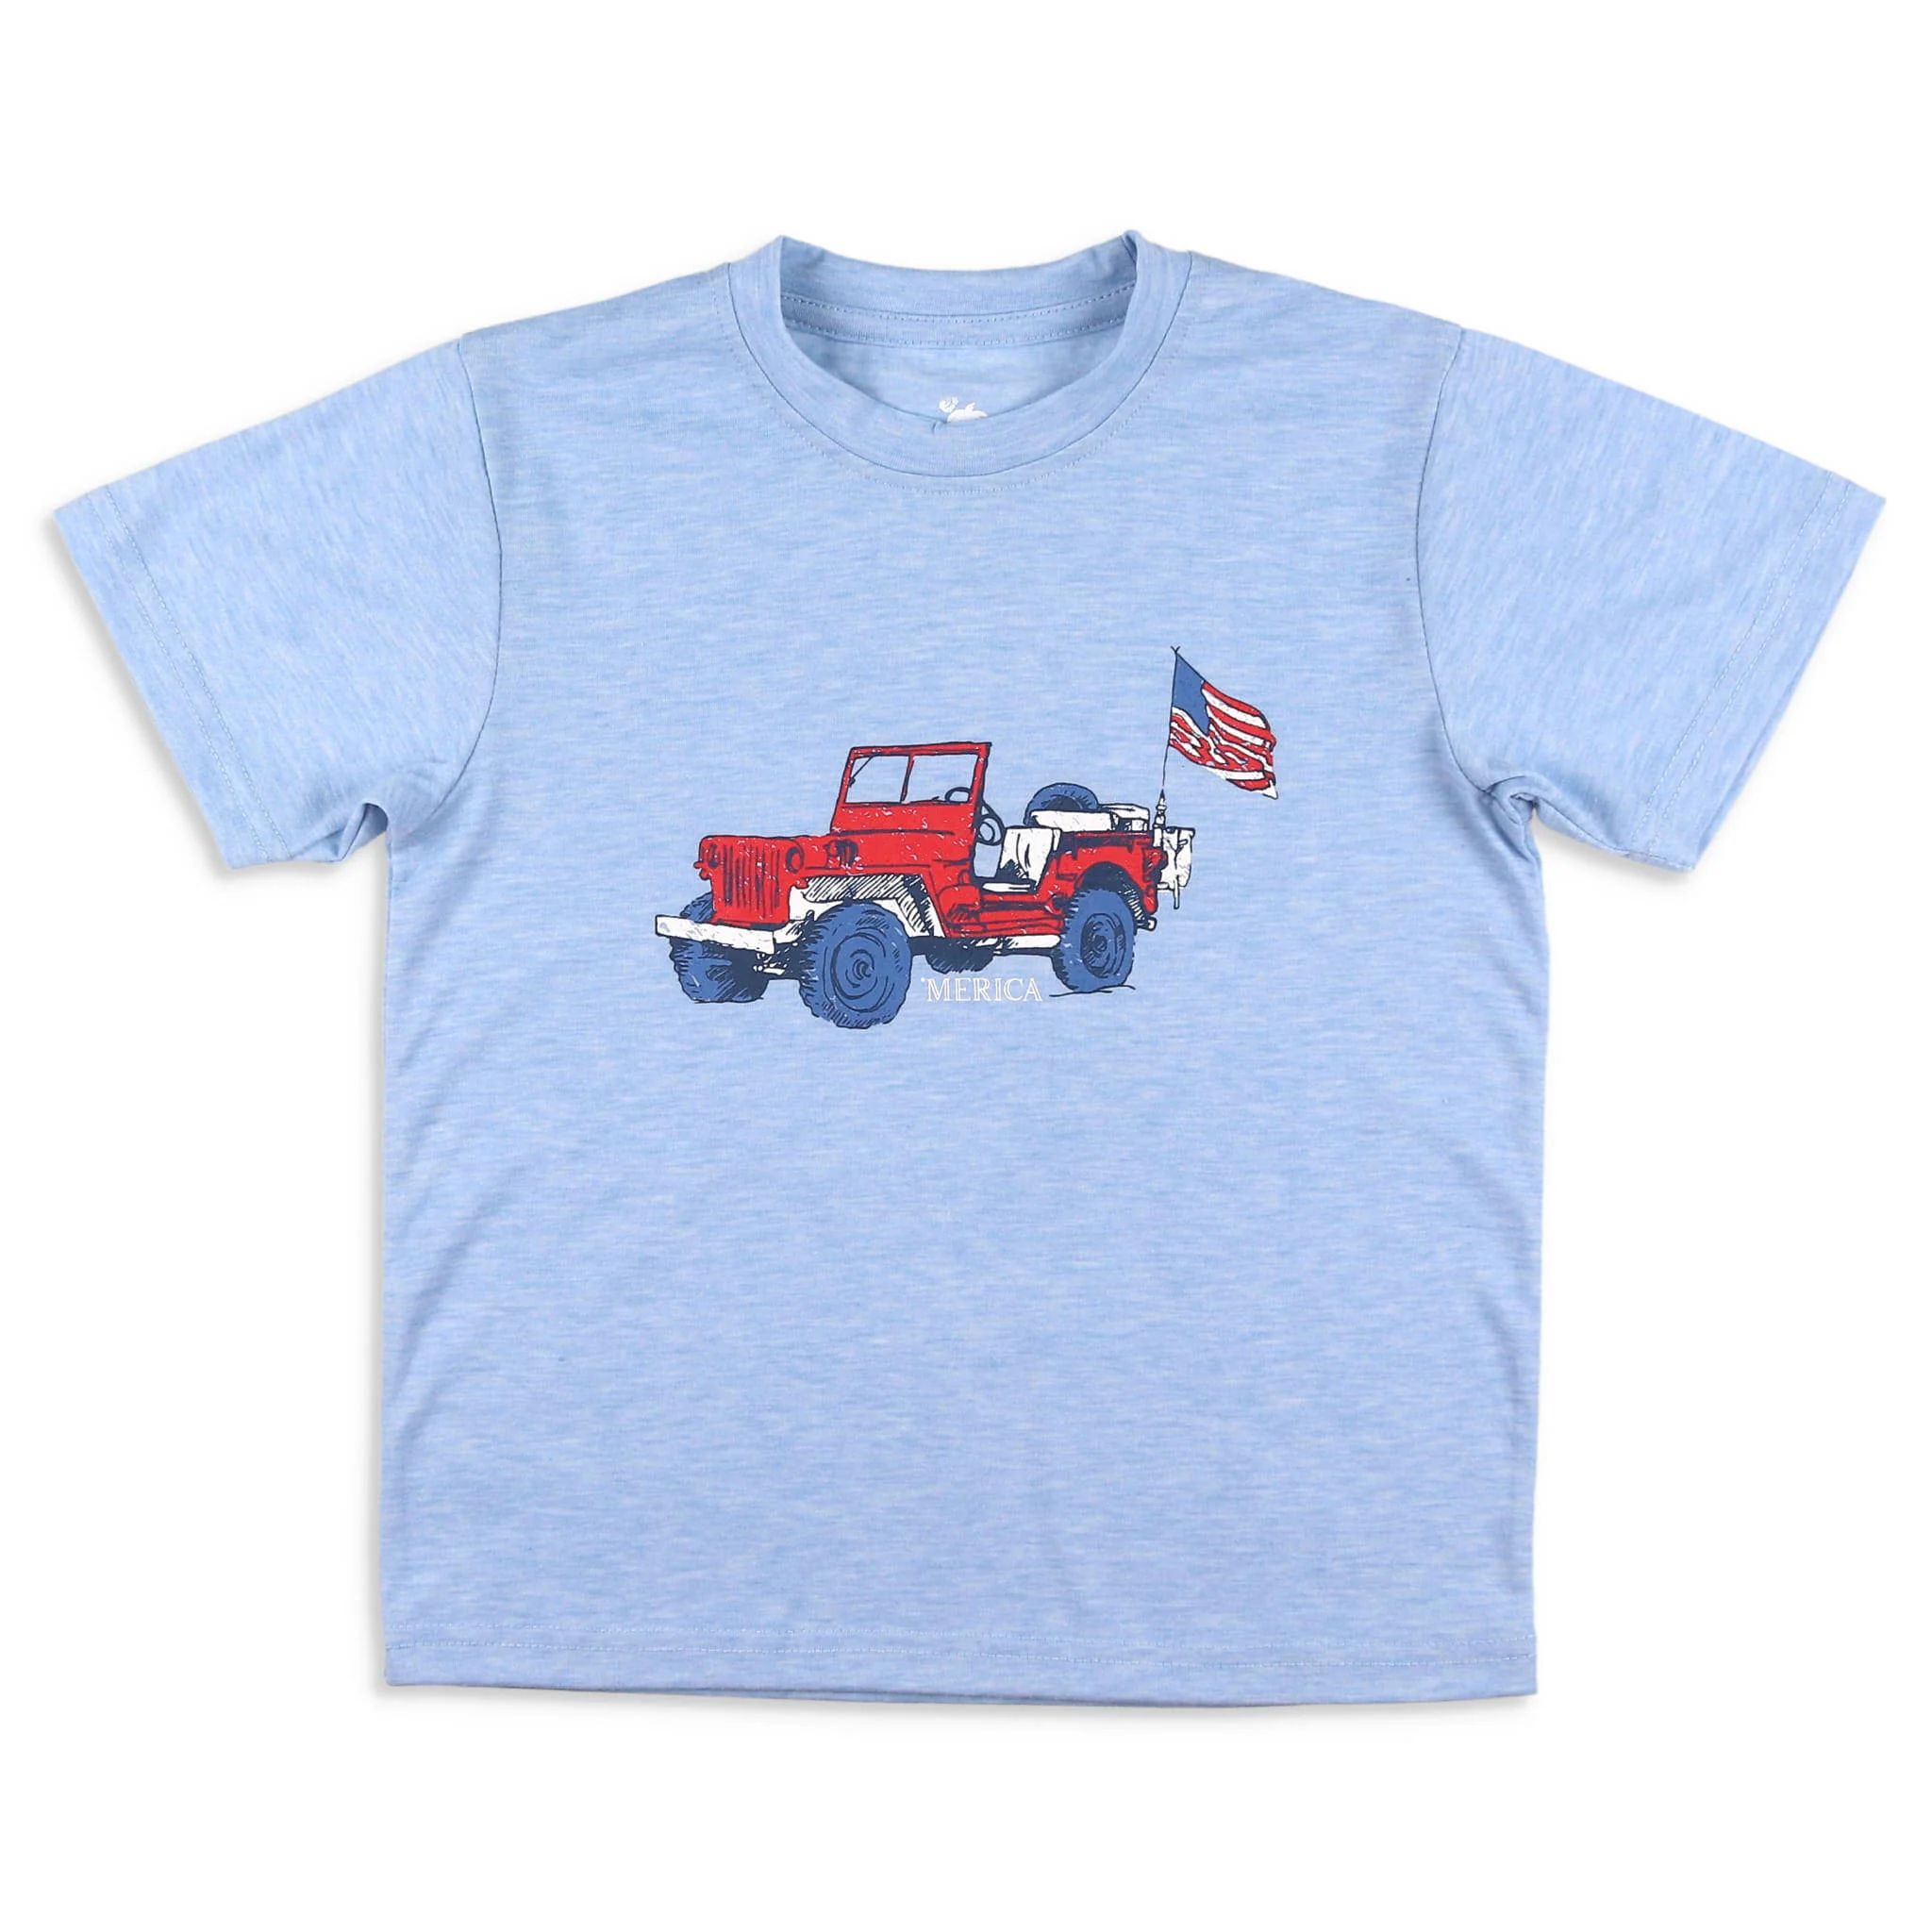 Boys Merica Graphic Tee - Shrimp and Grits Kids | Shrimp and Grits Kids